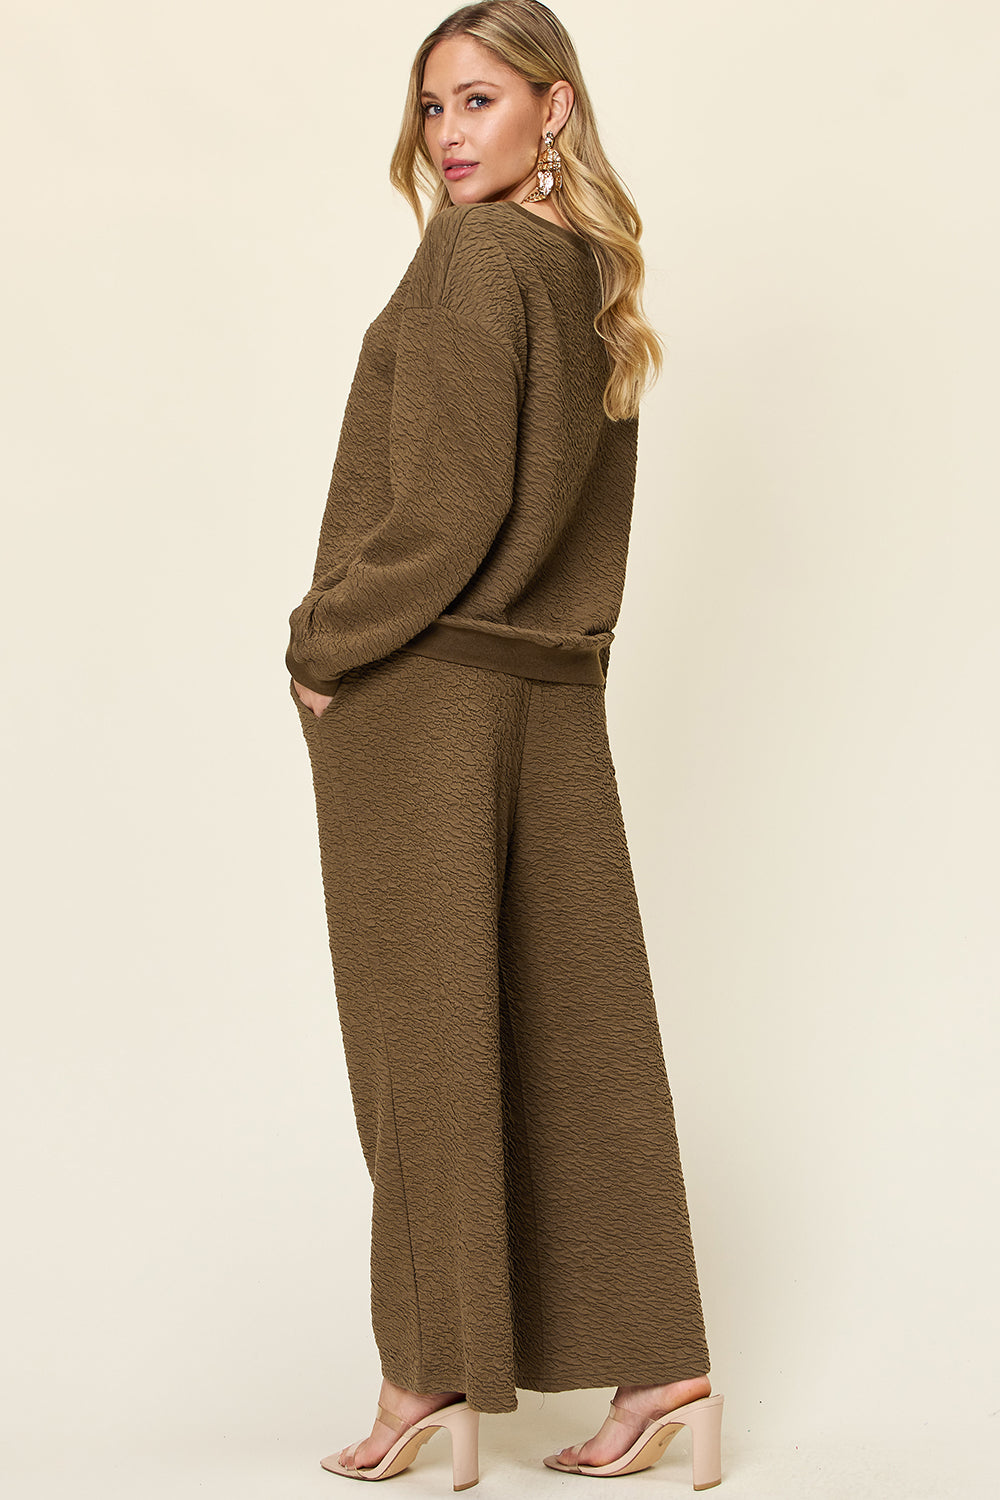 Double Take Texture Long Sleeve Top and Pants Set